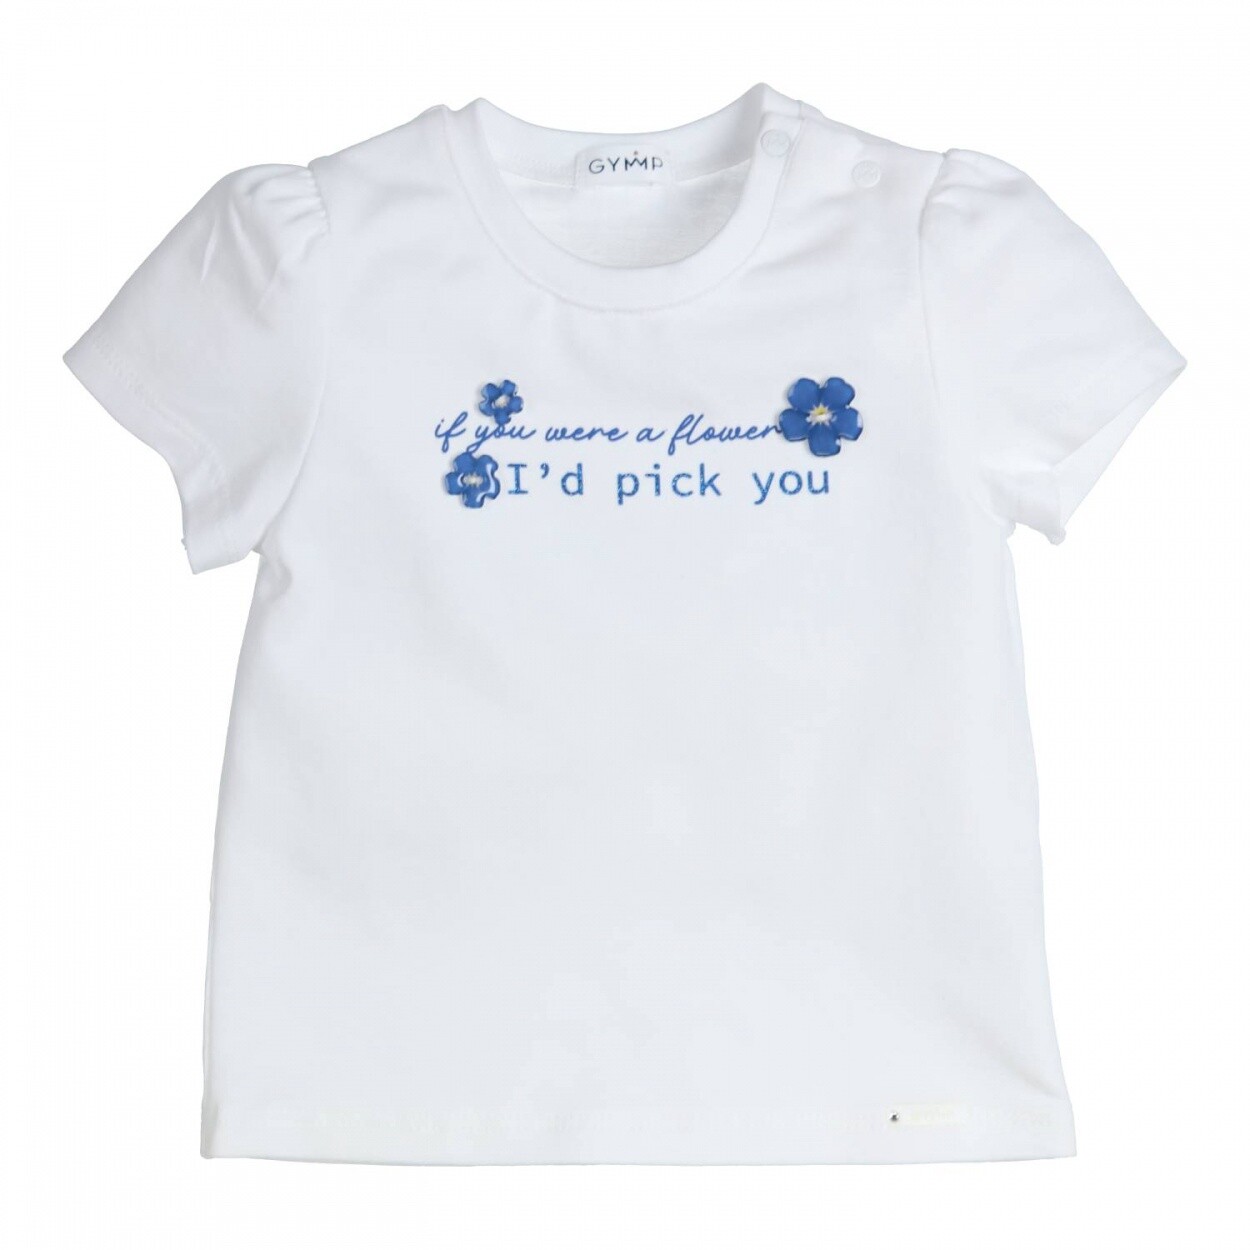 Gymp T-shirt Aerobic If you were a flower White 353-4329-10